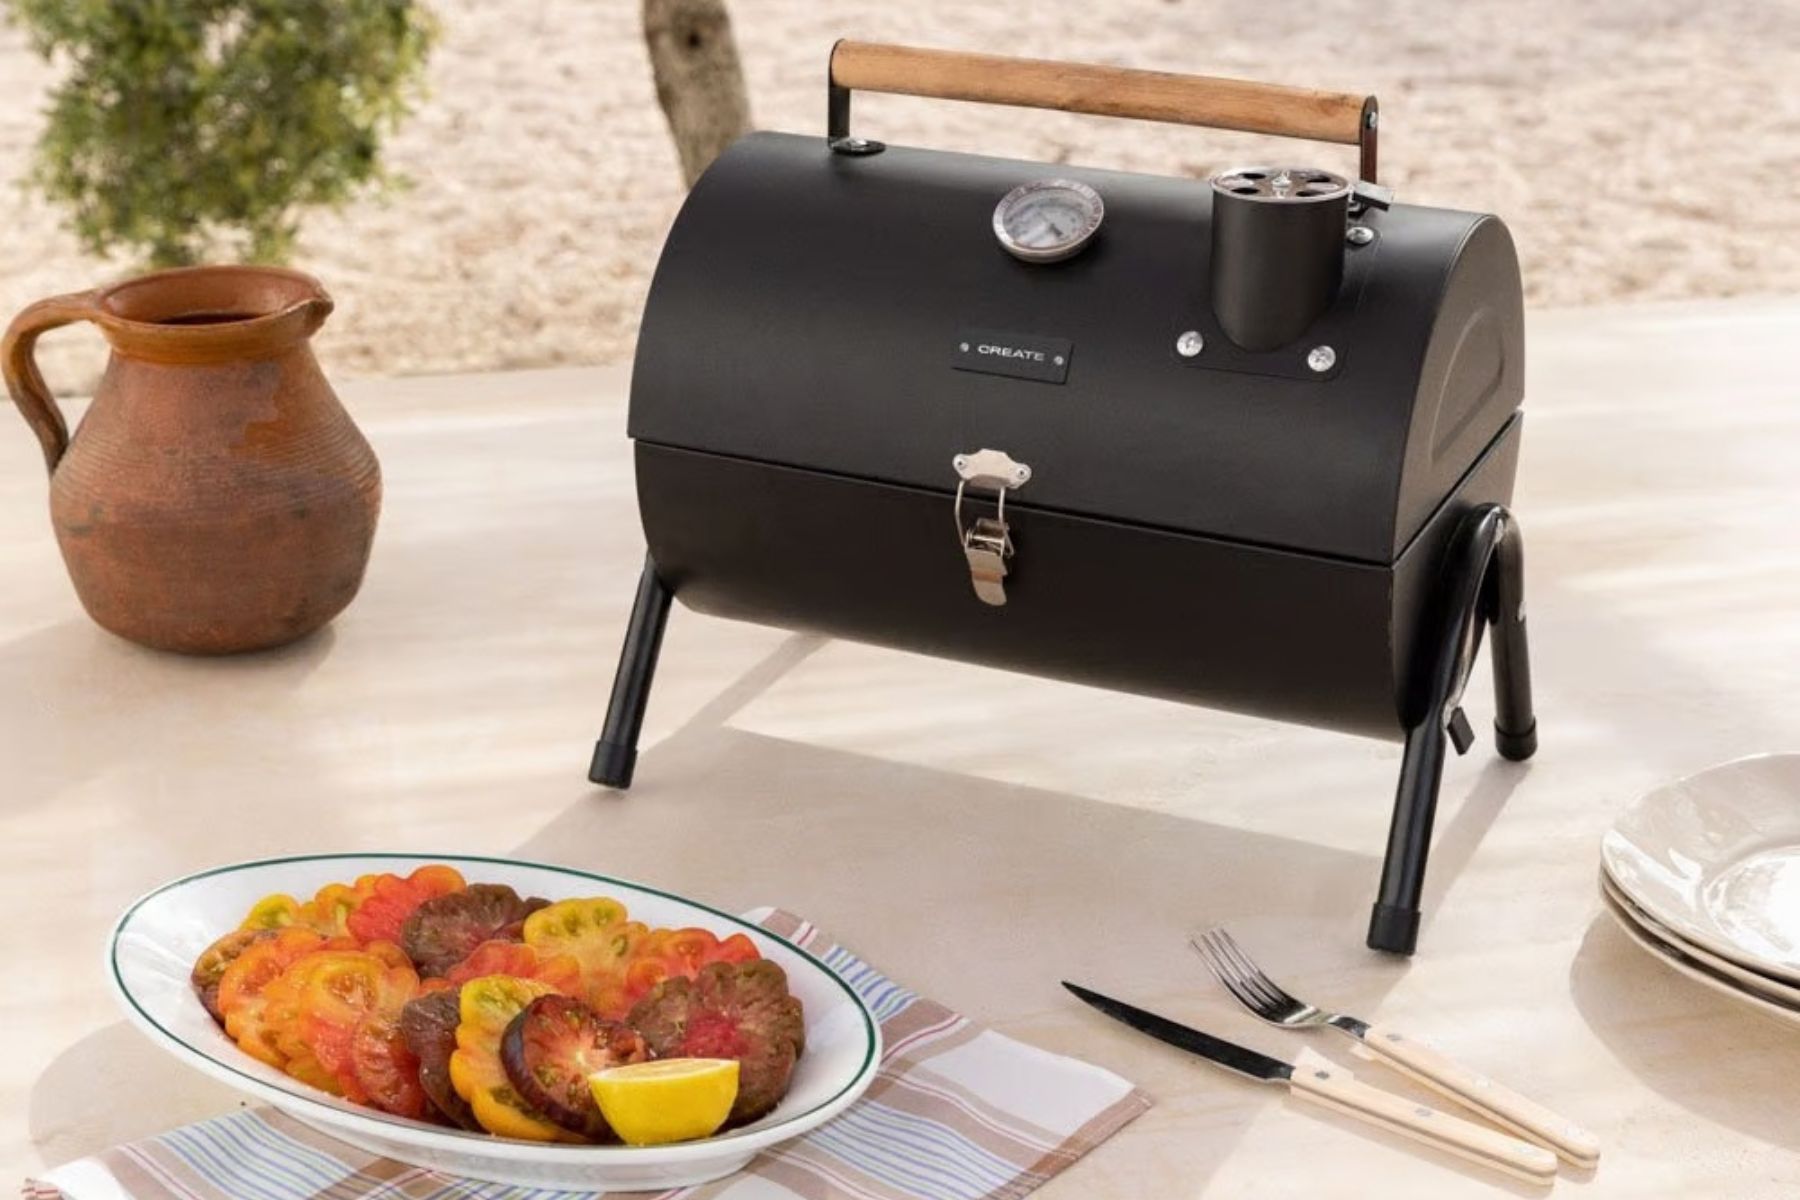 https://hello-hello.fr/wp-content/uploads/2022/07/accessoires-barbecue-create.jpg